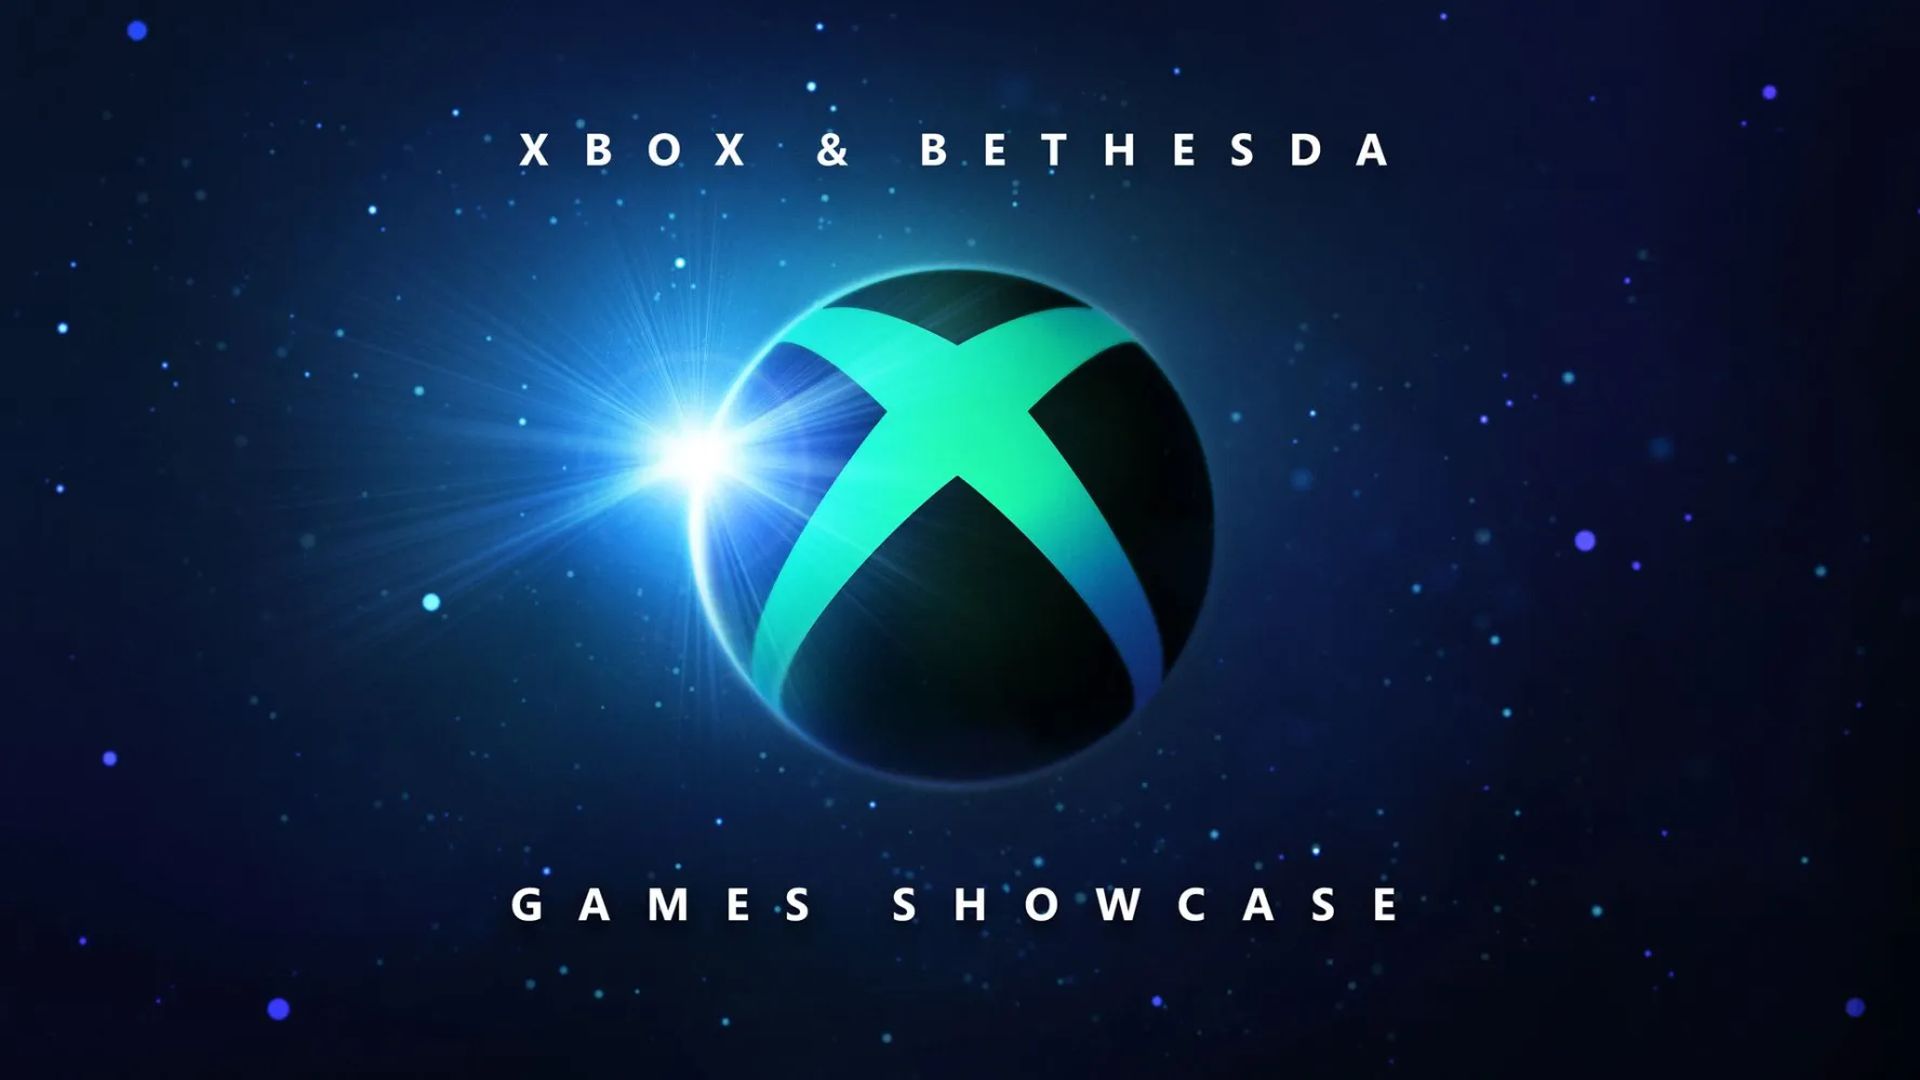 Xbox Games Showcase Extended Announced for June 14th